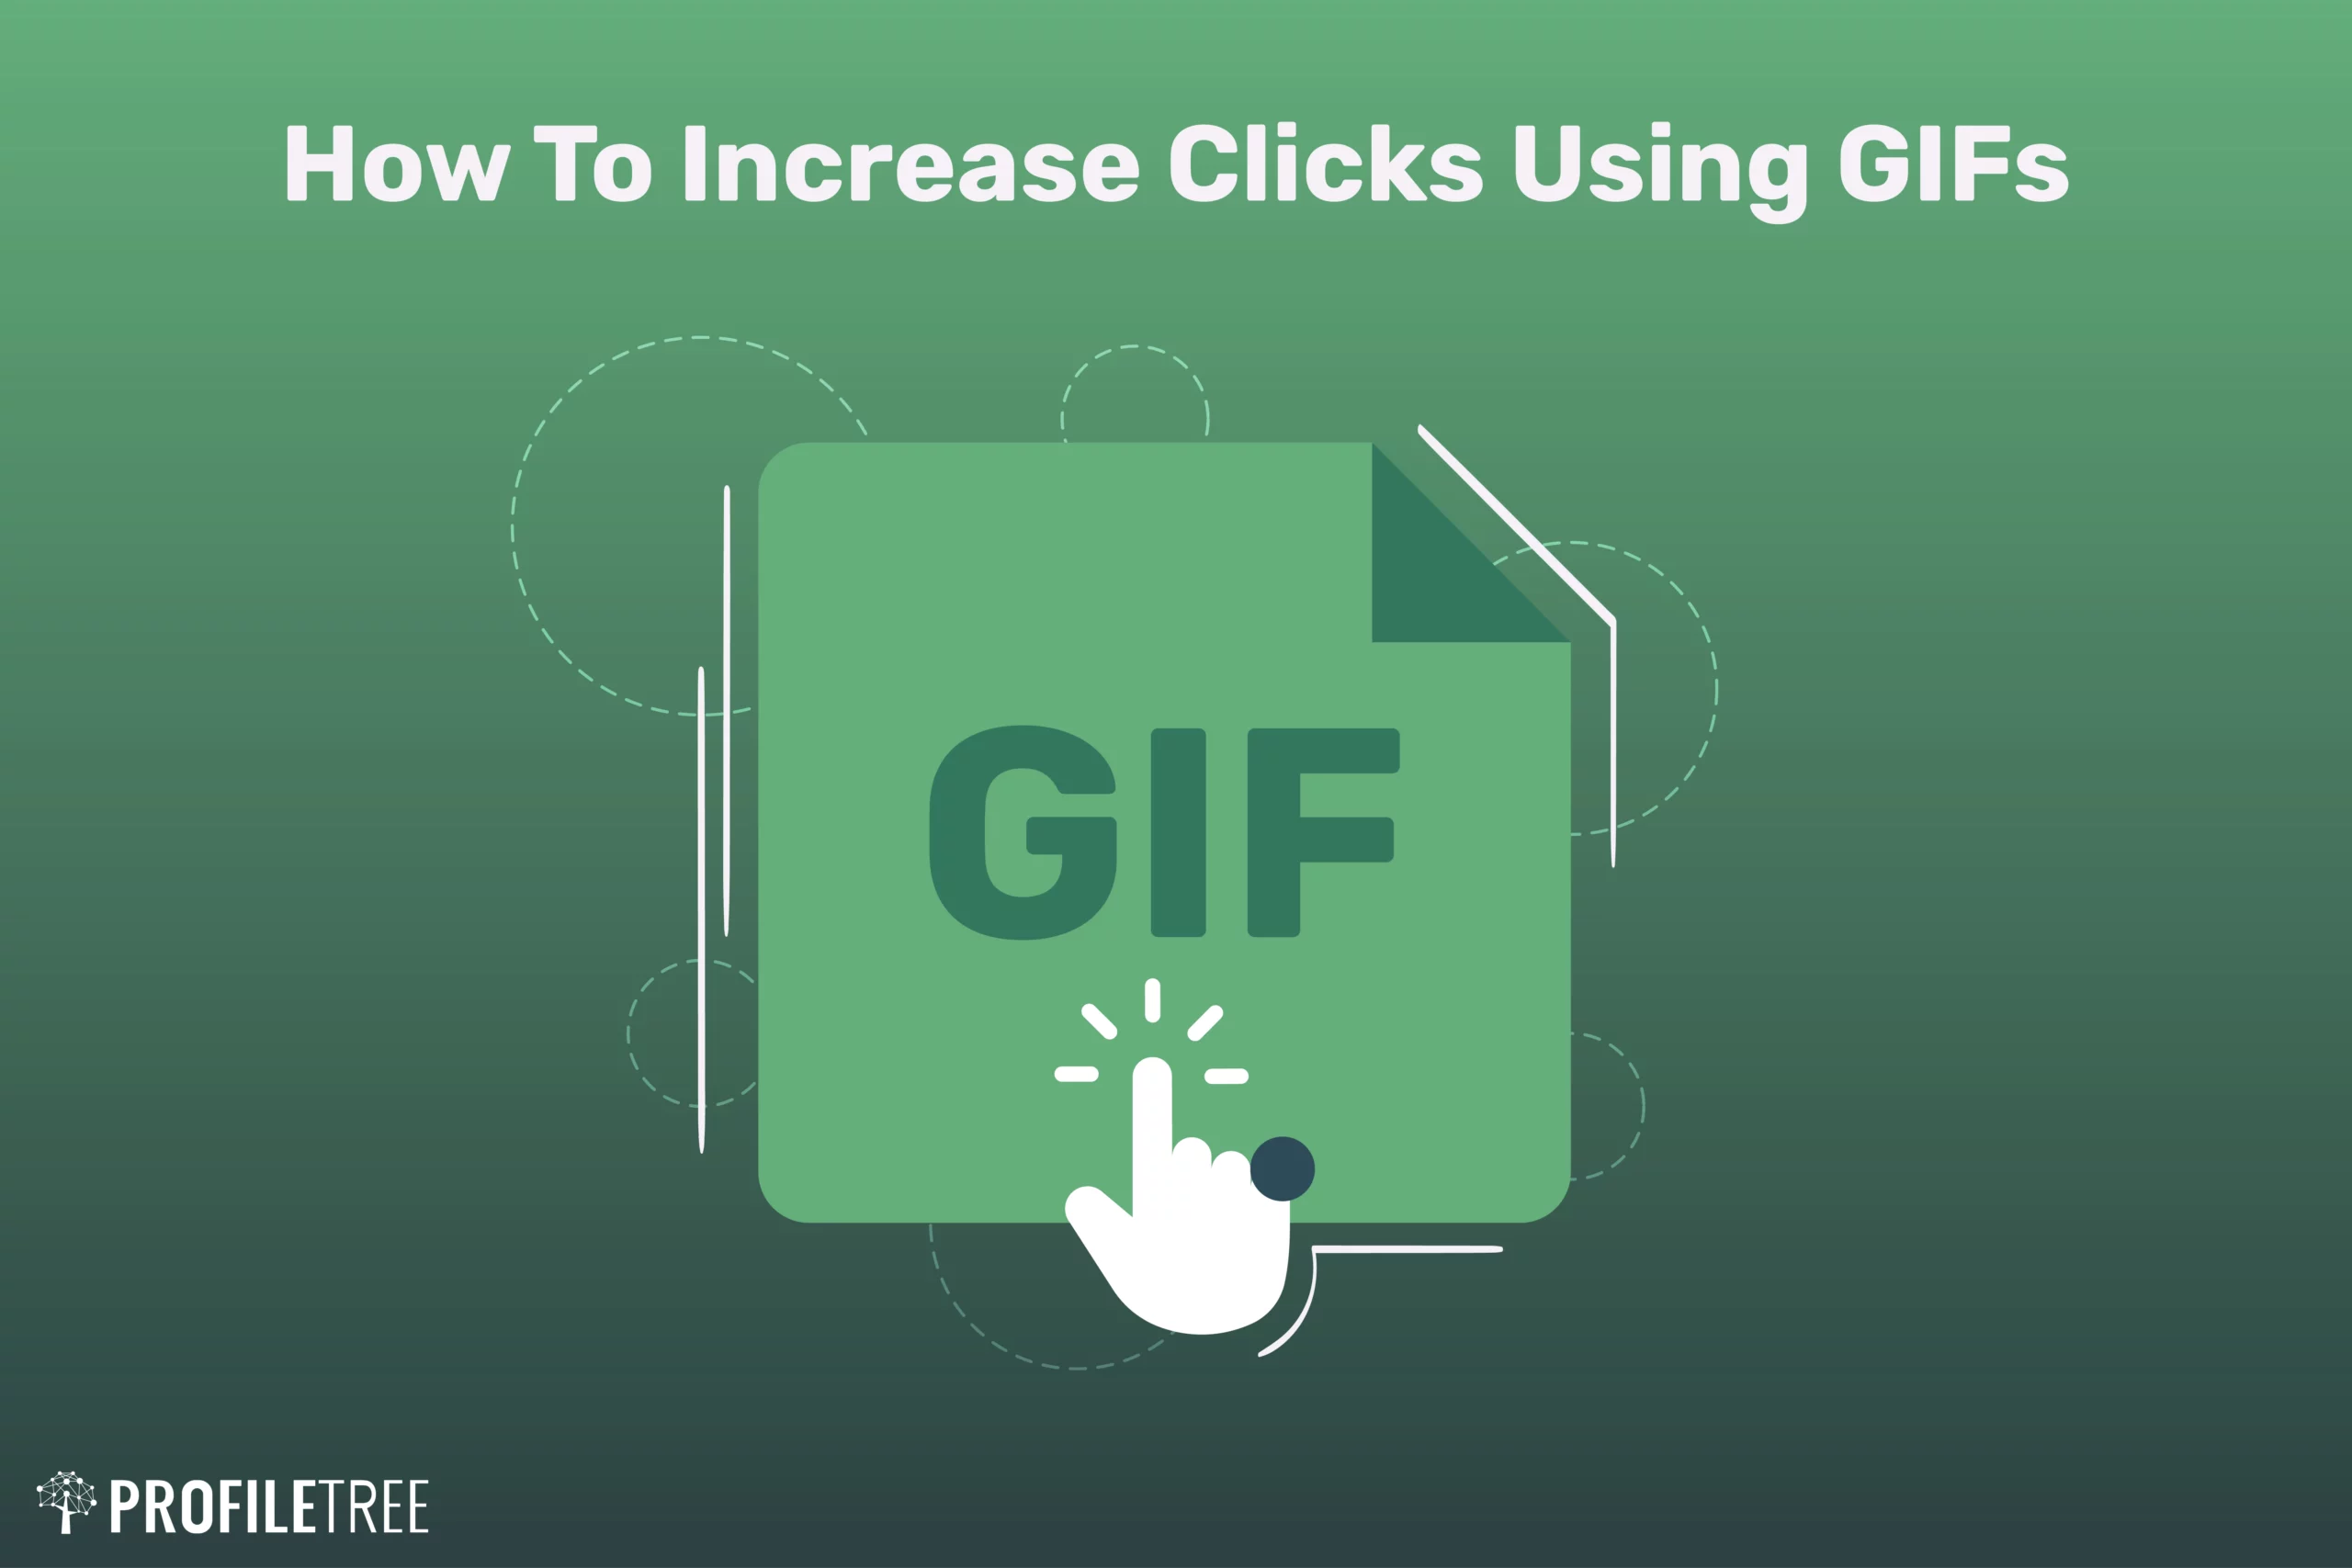 Increase Clicks By Using GIFs